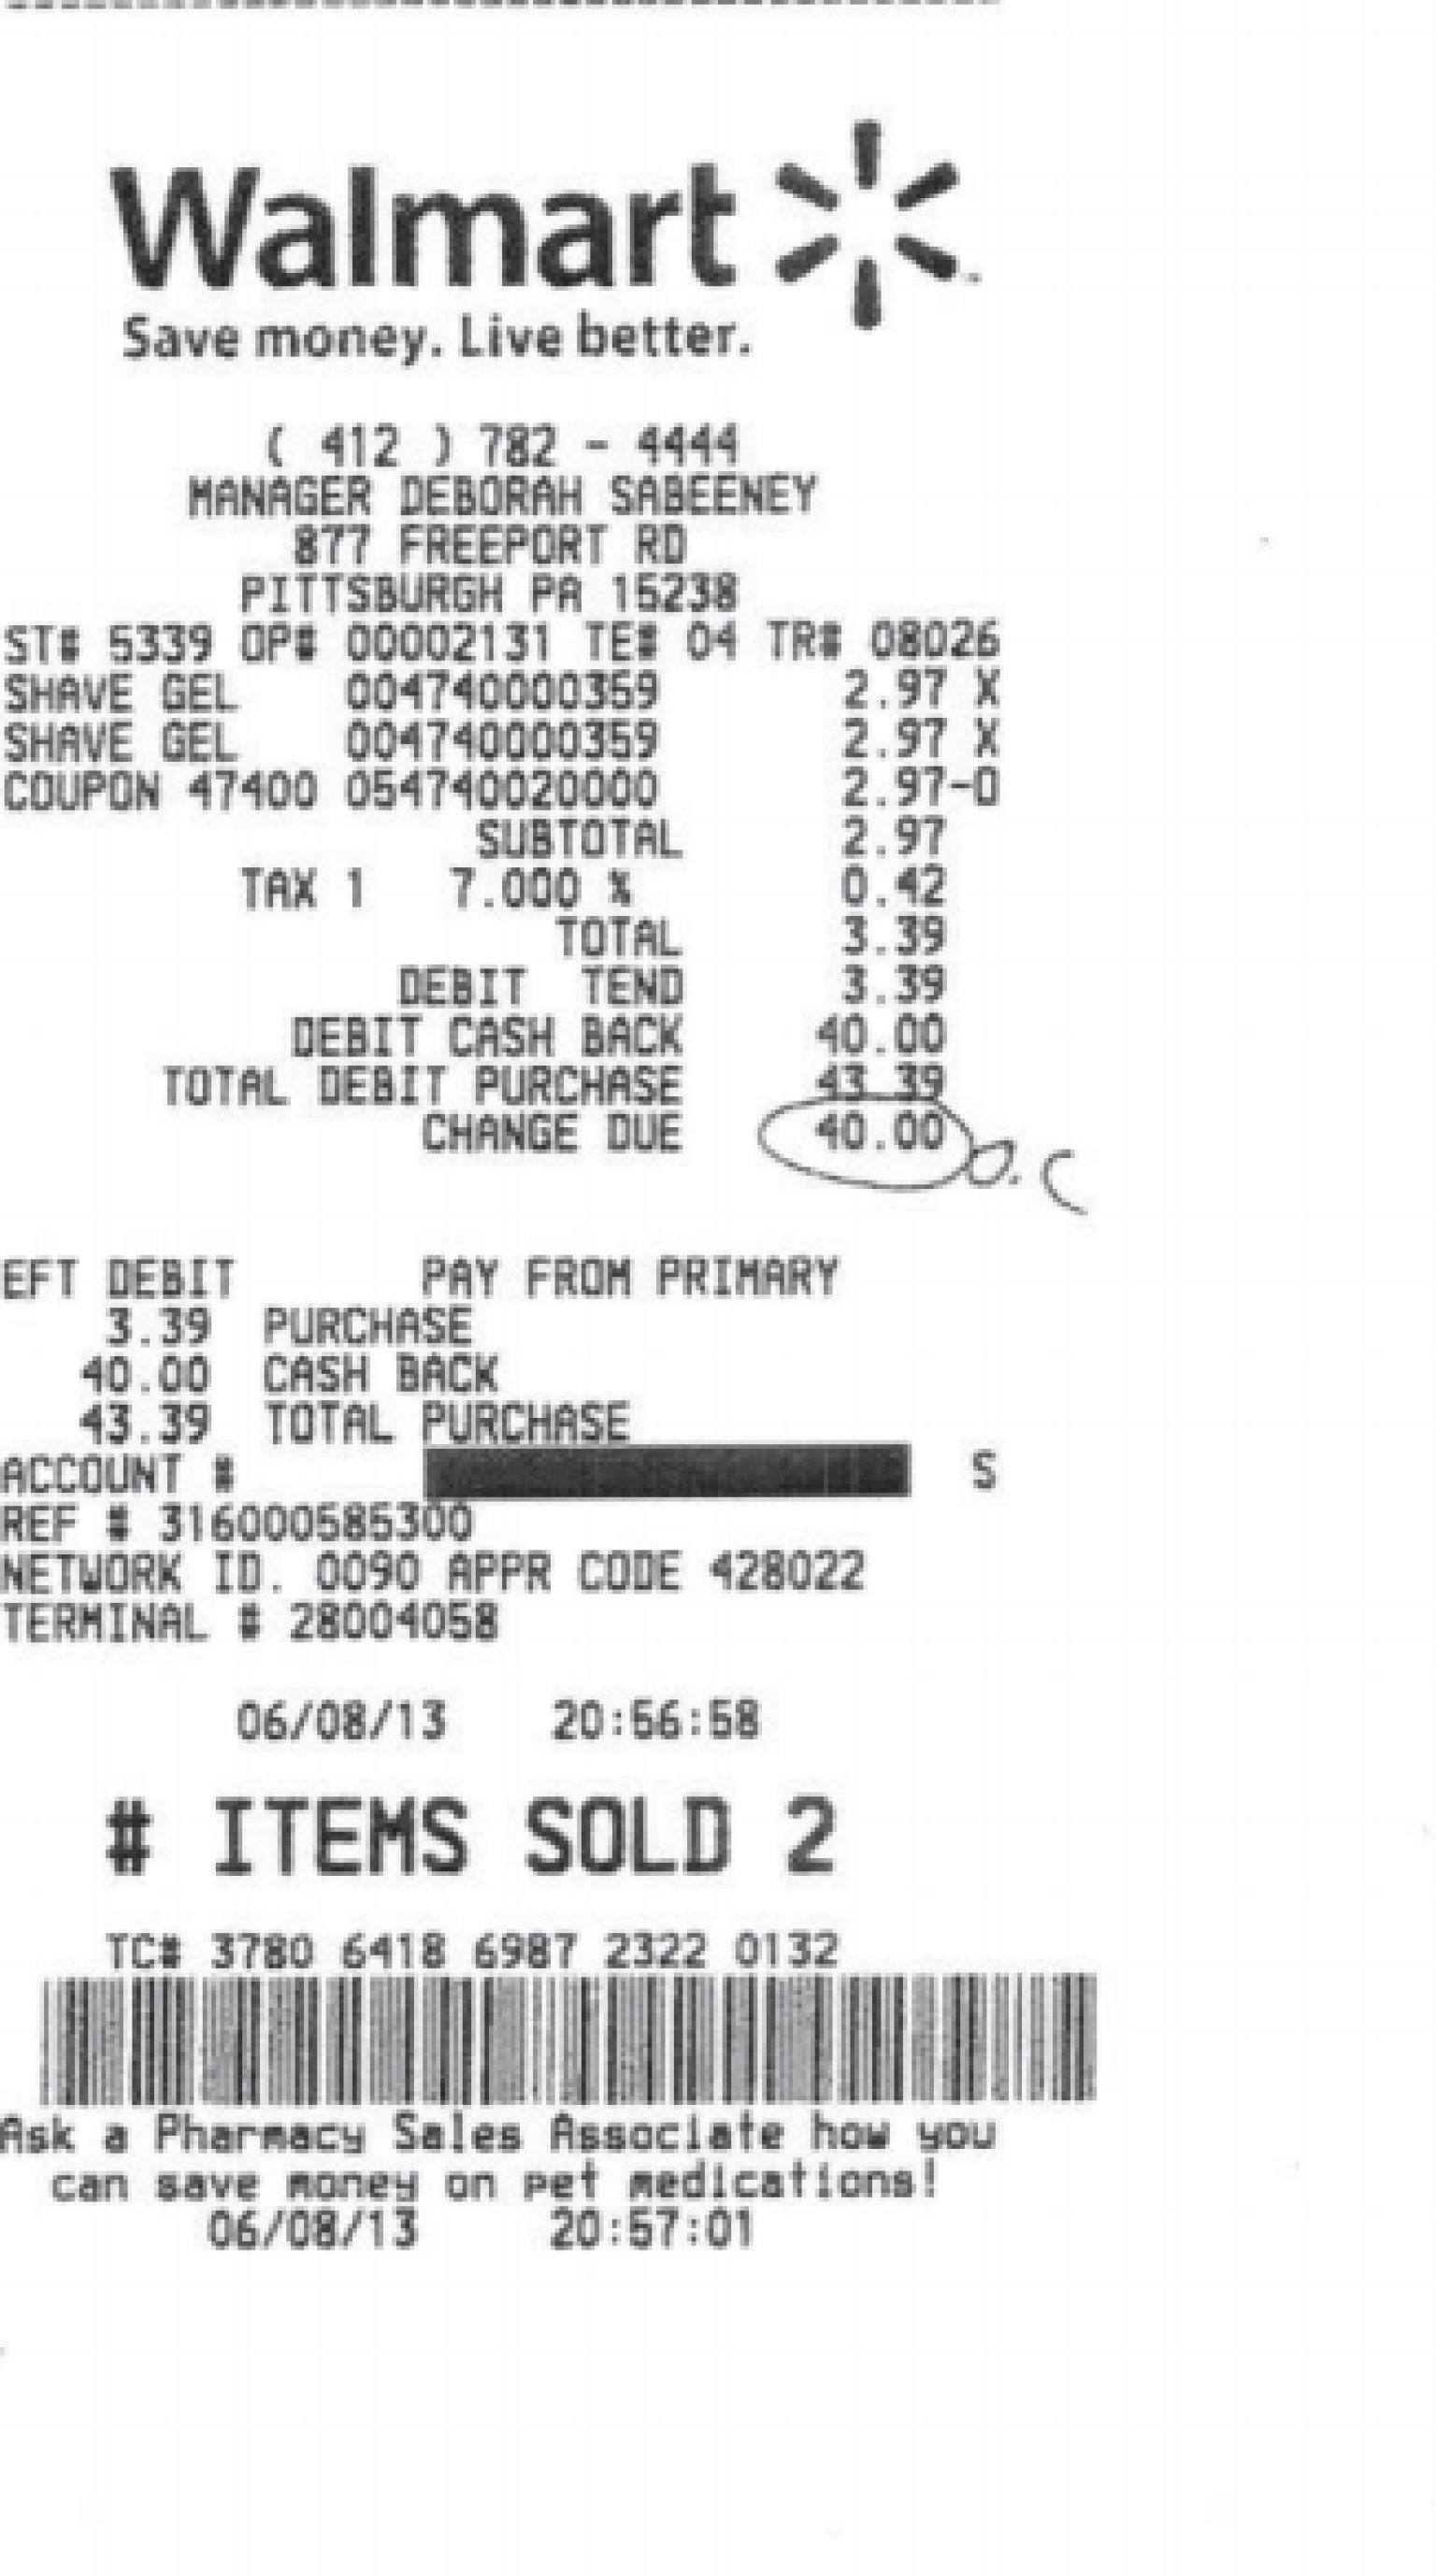 Walmart Allegedly Overtaxing On 2For1 Coupon Purchases (PHOTO)